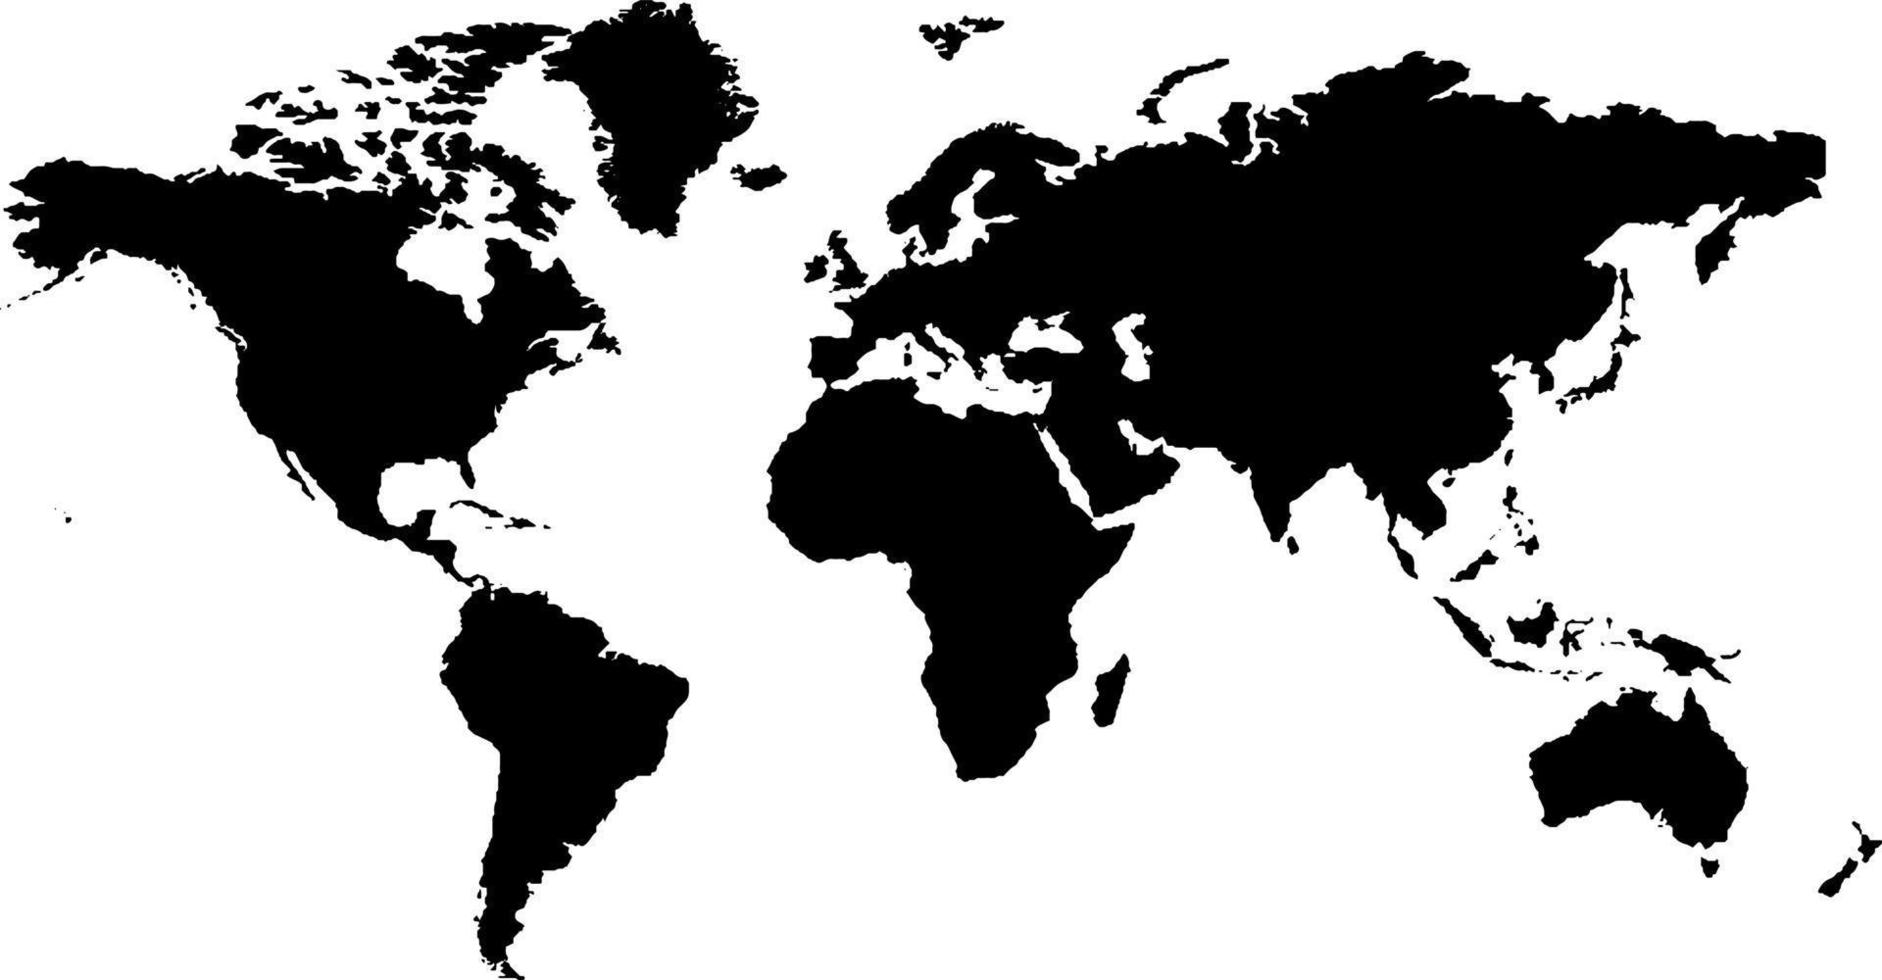 Black colored global outline map. Political world map. Wordwide cartography. Vector illustration map.